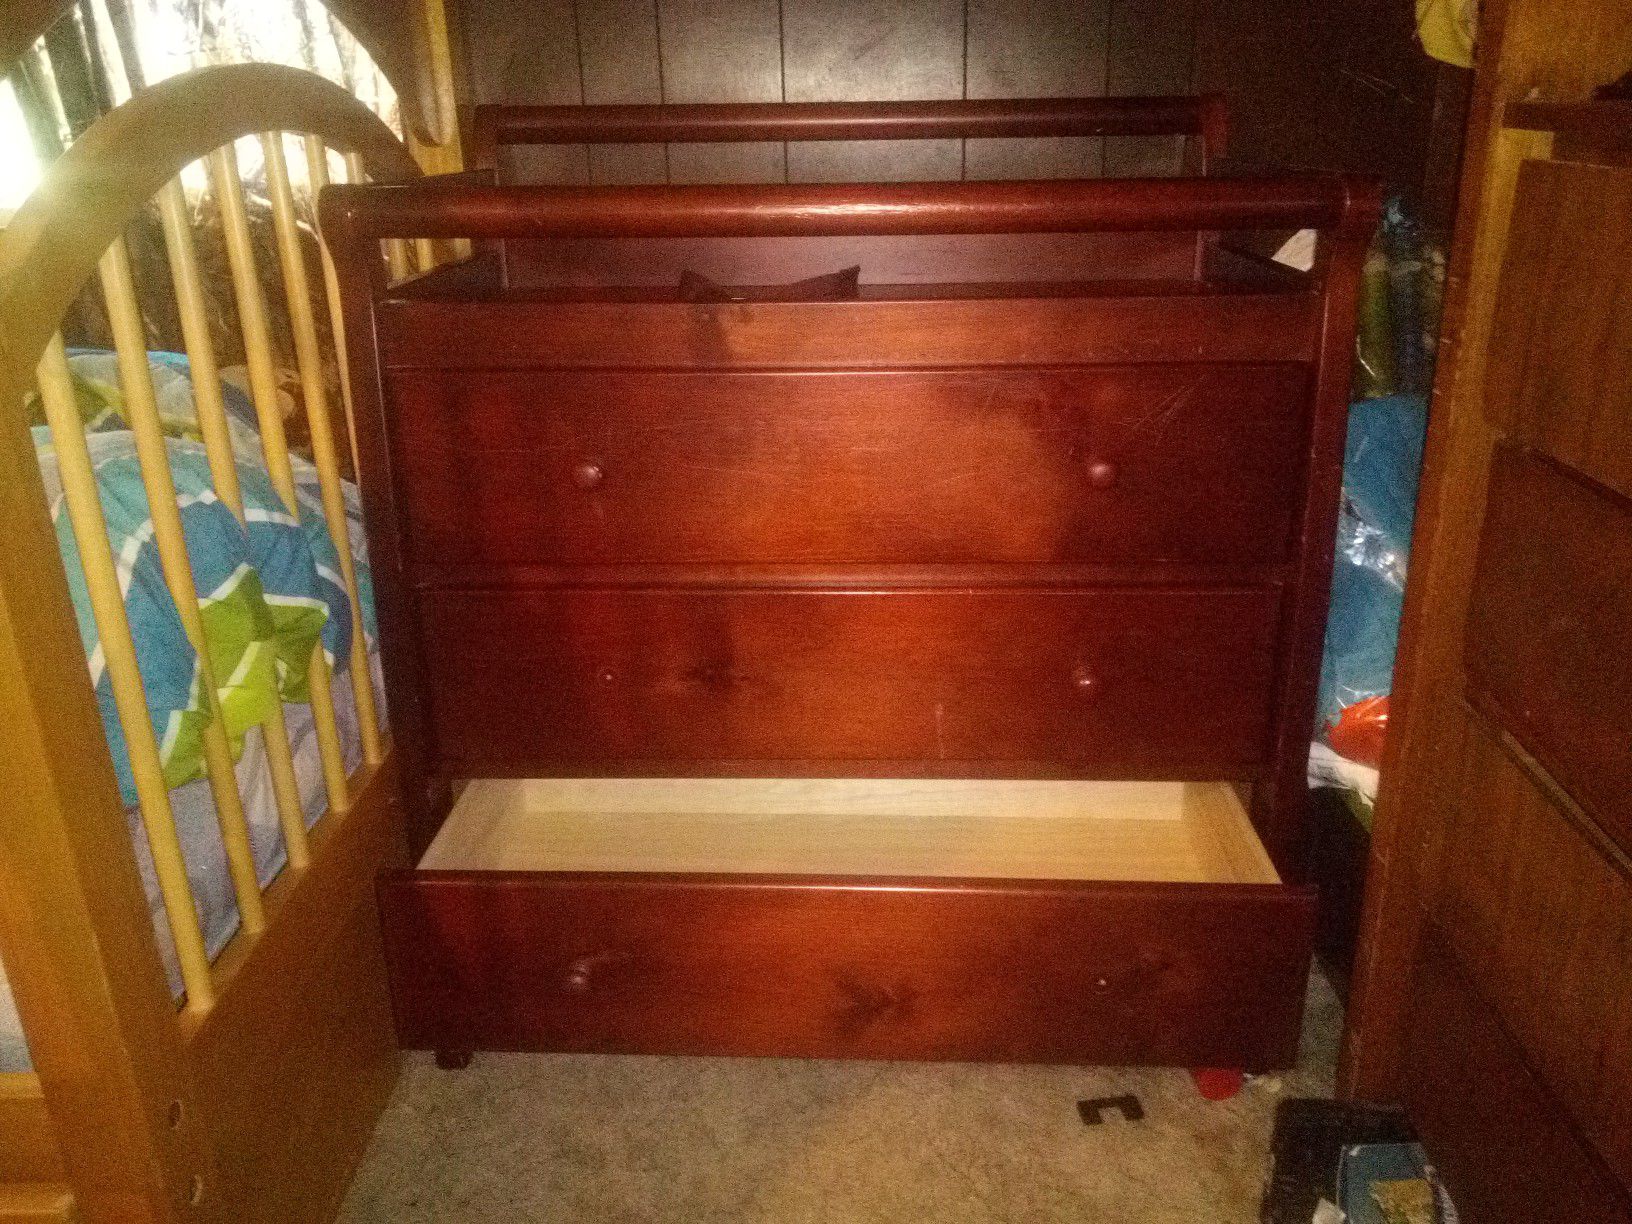 Dresser/ changing table